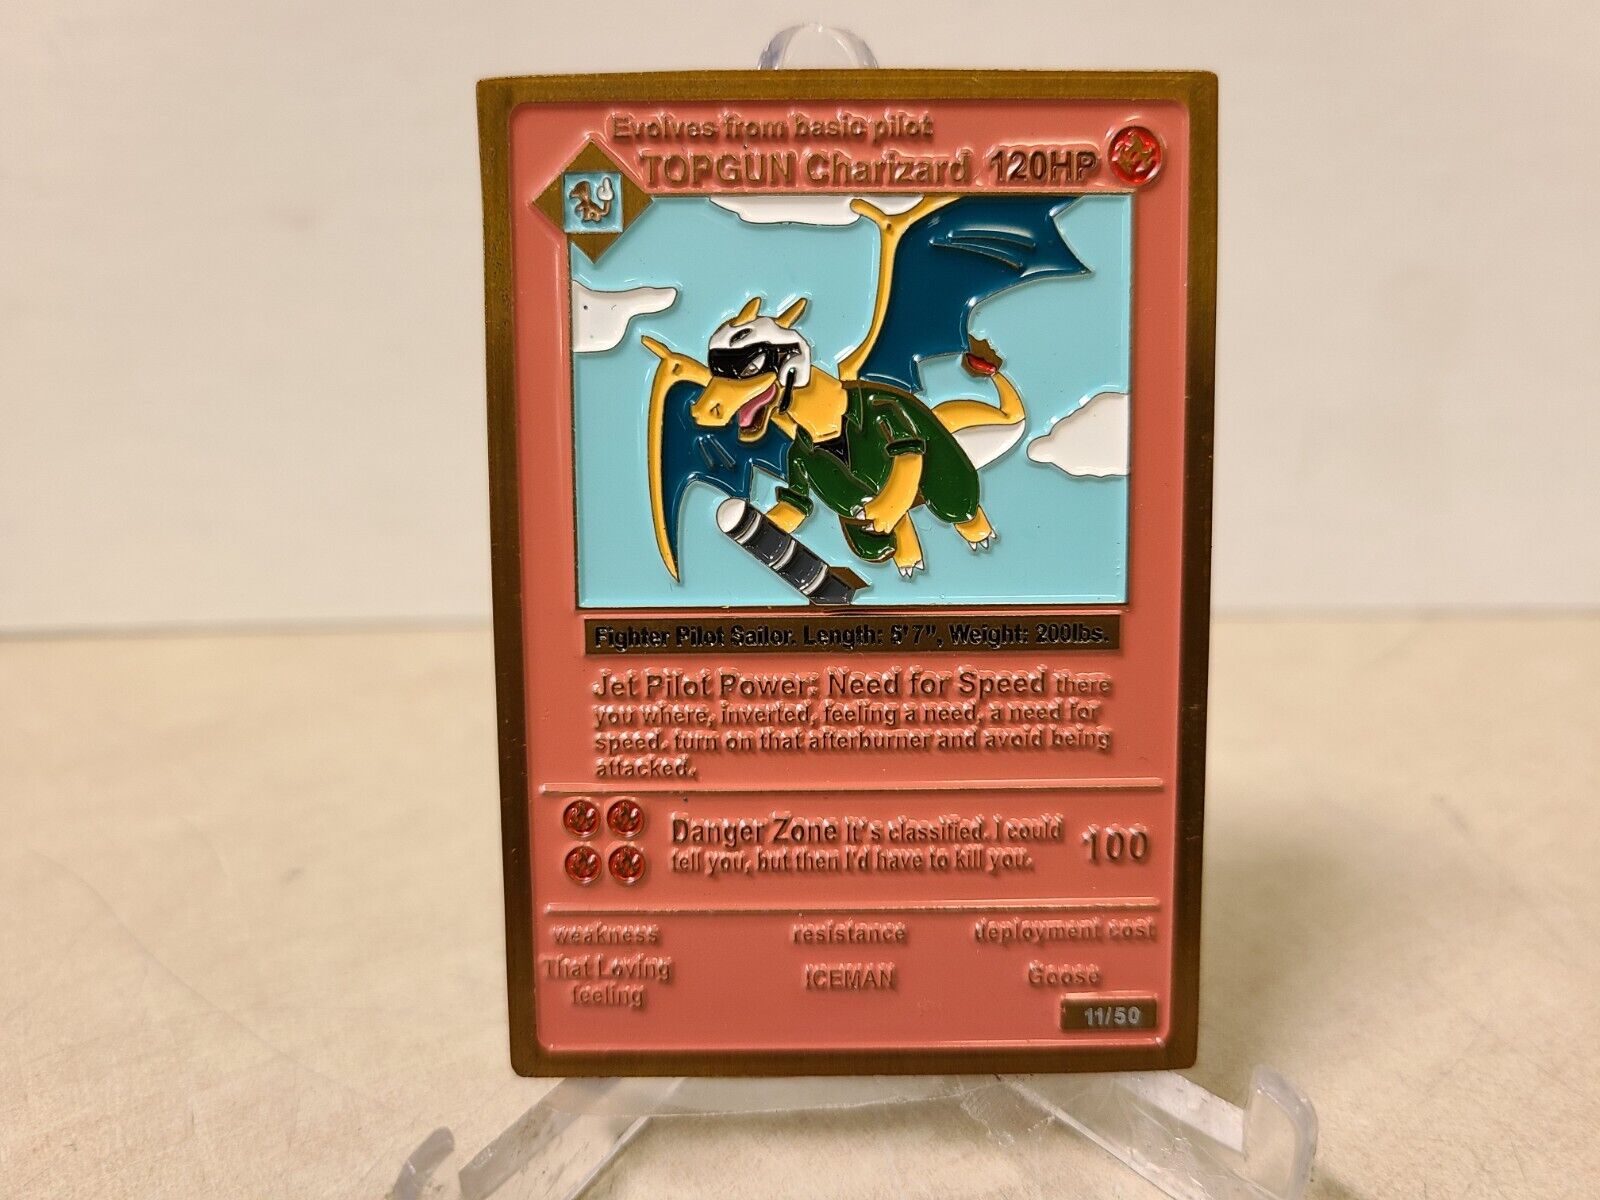 TopGun Charizard 120HP Evloves From Basic Pilot Challenge Coin 11/50